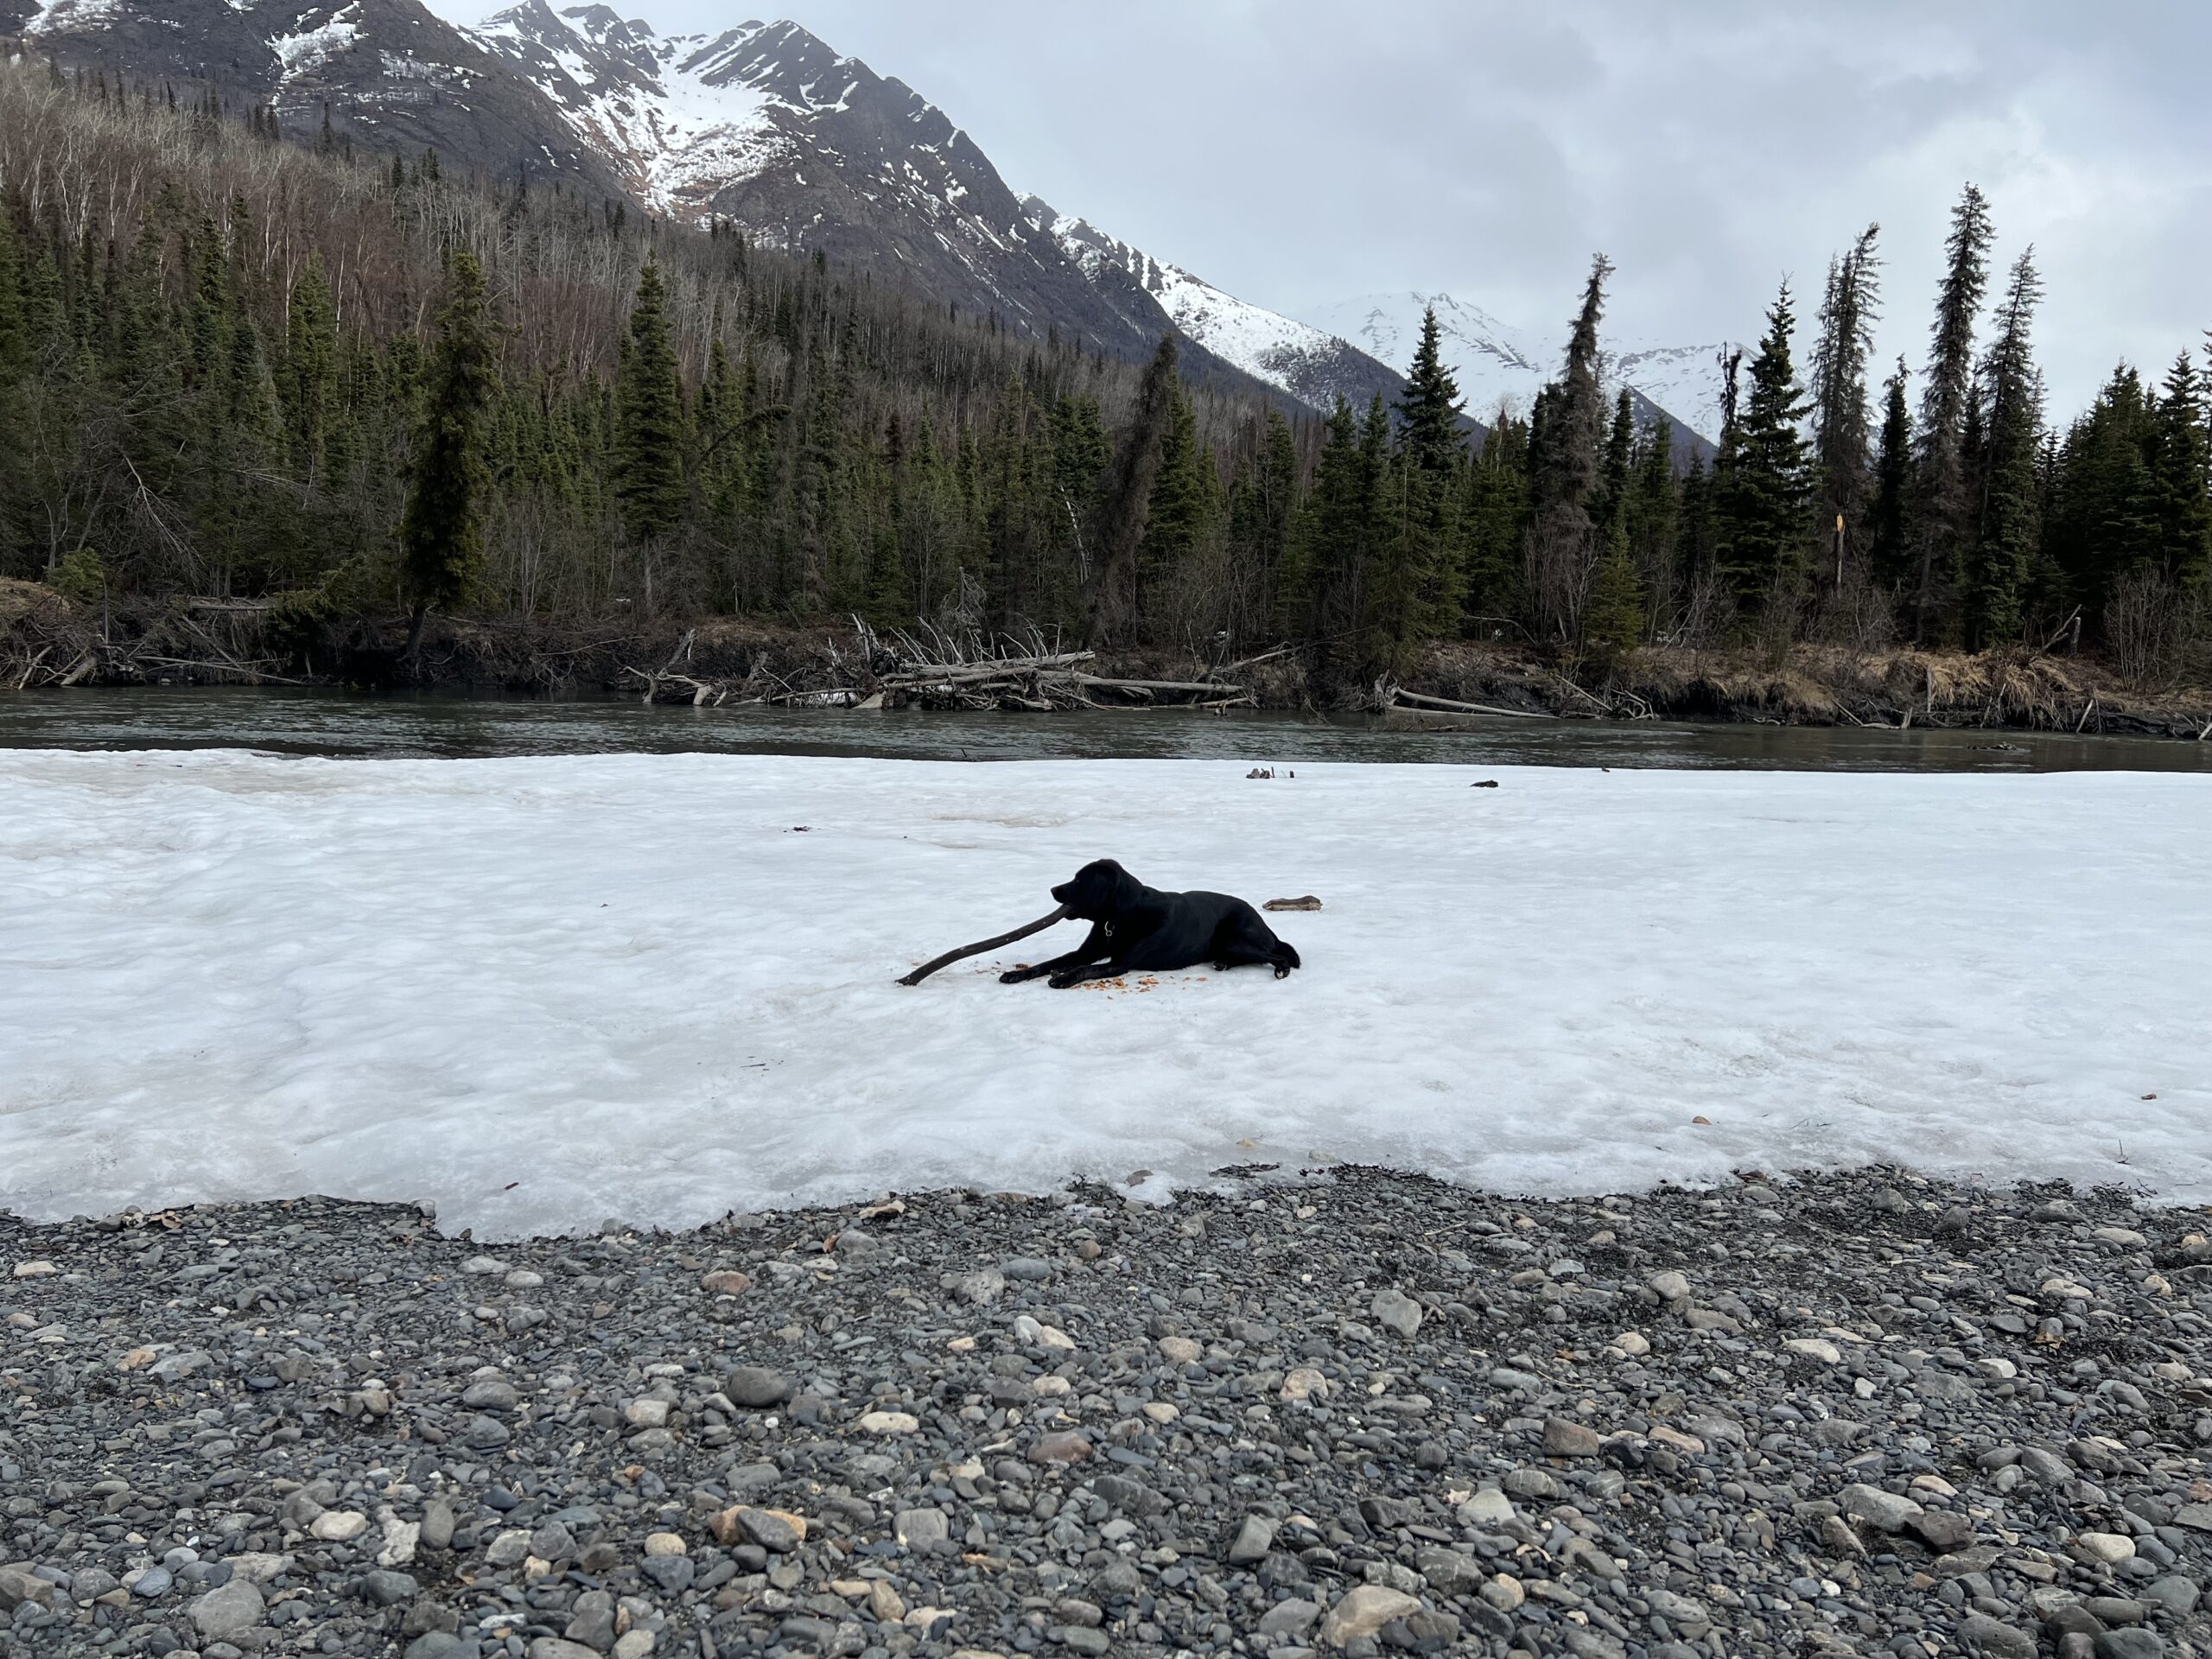 A black dog chewing a stick while sitting on snow near a river.